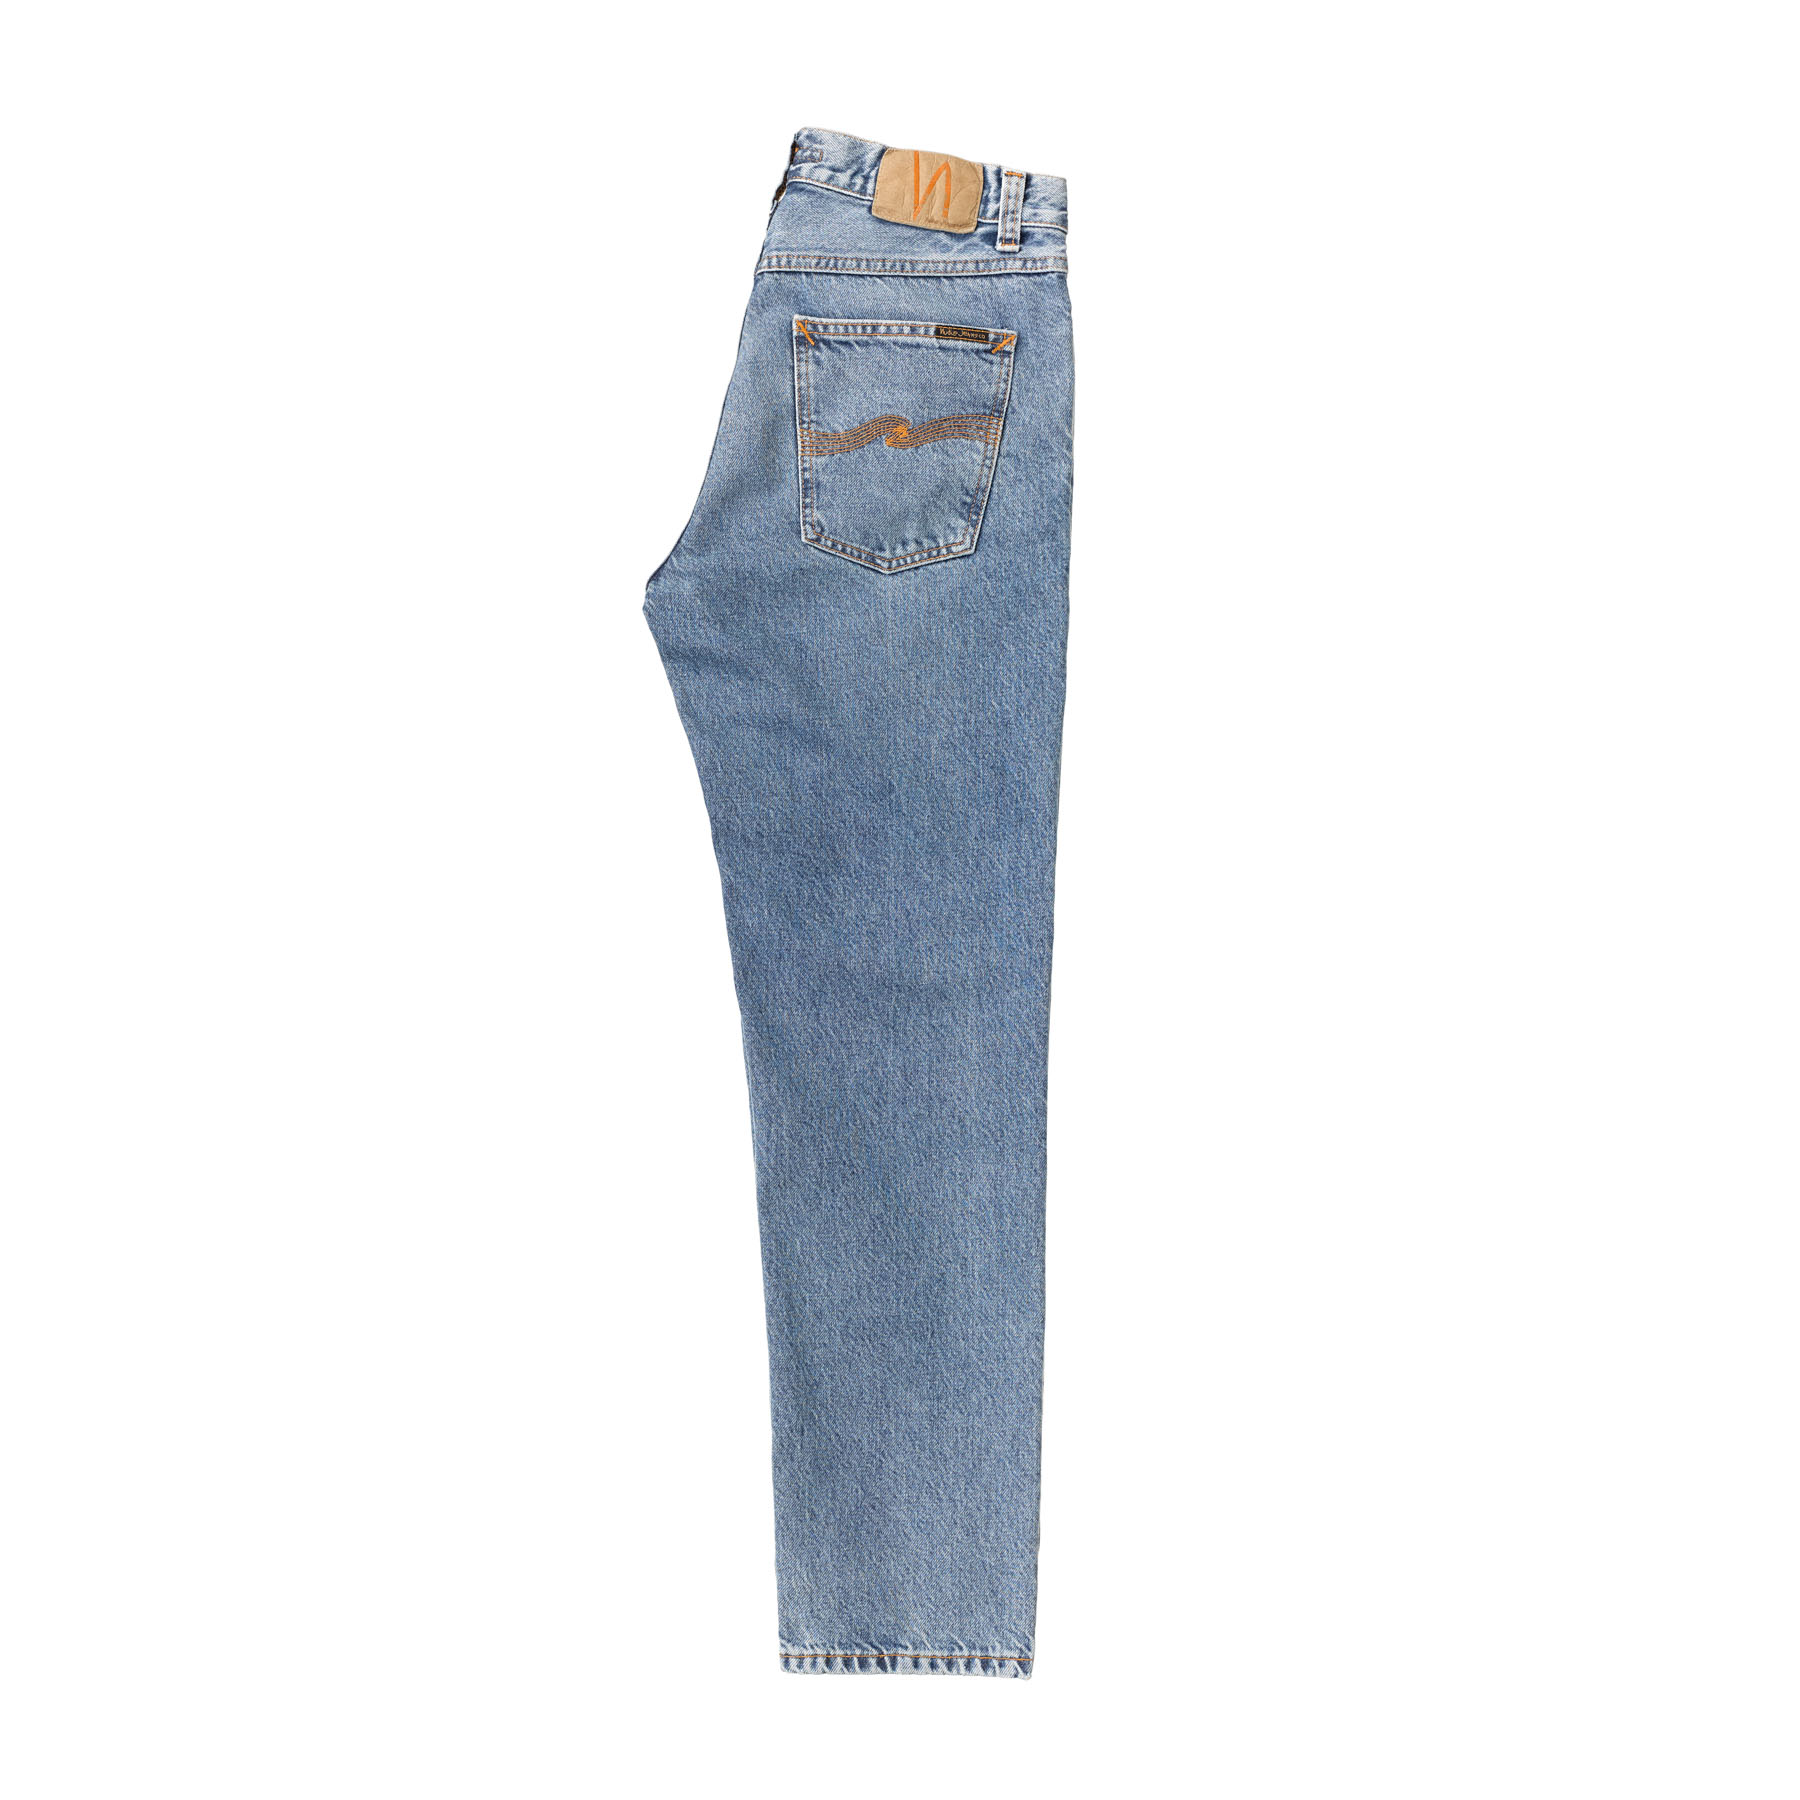 NUDIE JEANS Jeans Gritty Jackson blue traces 31/30